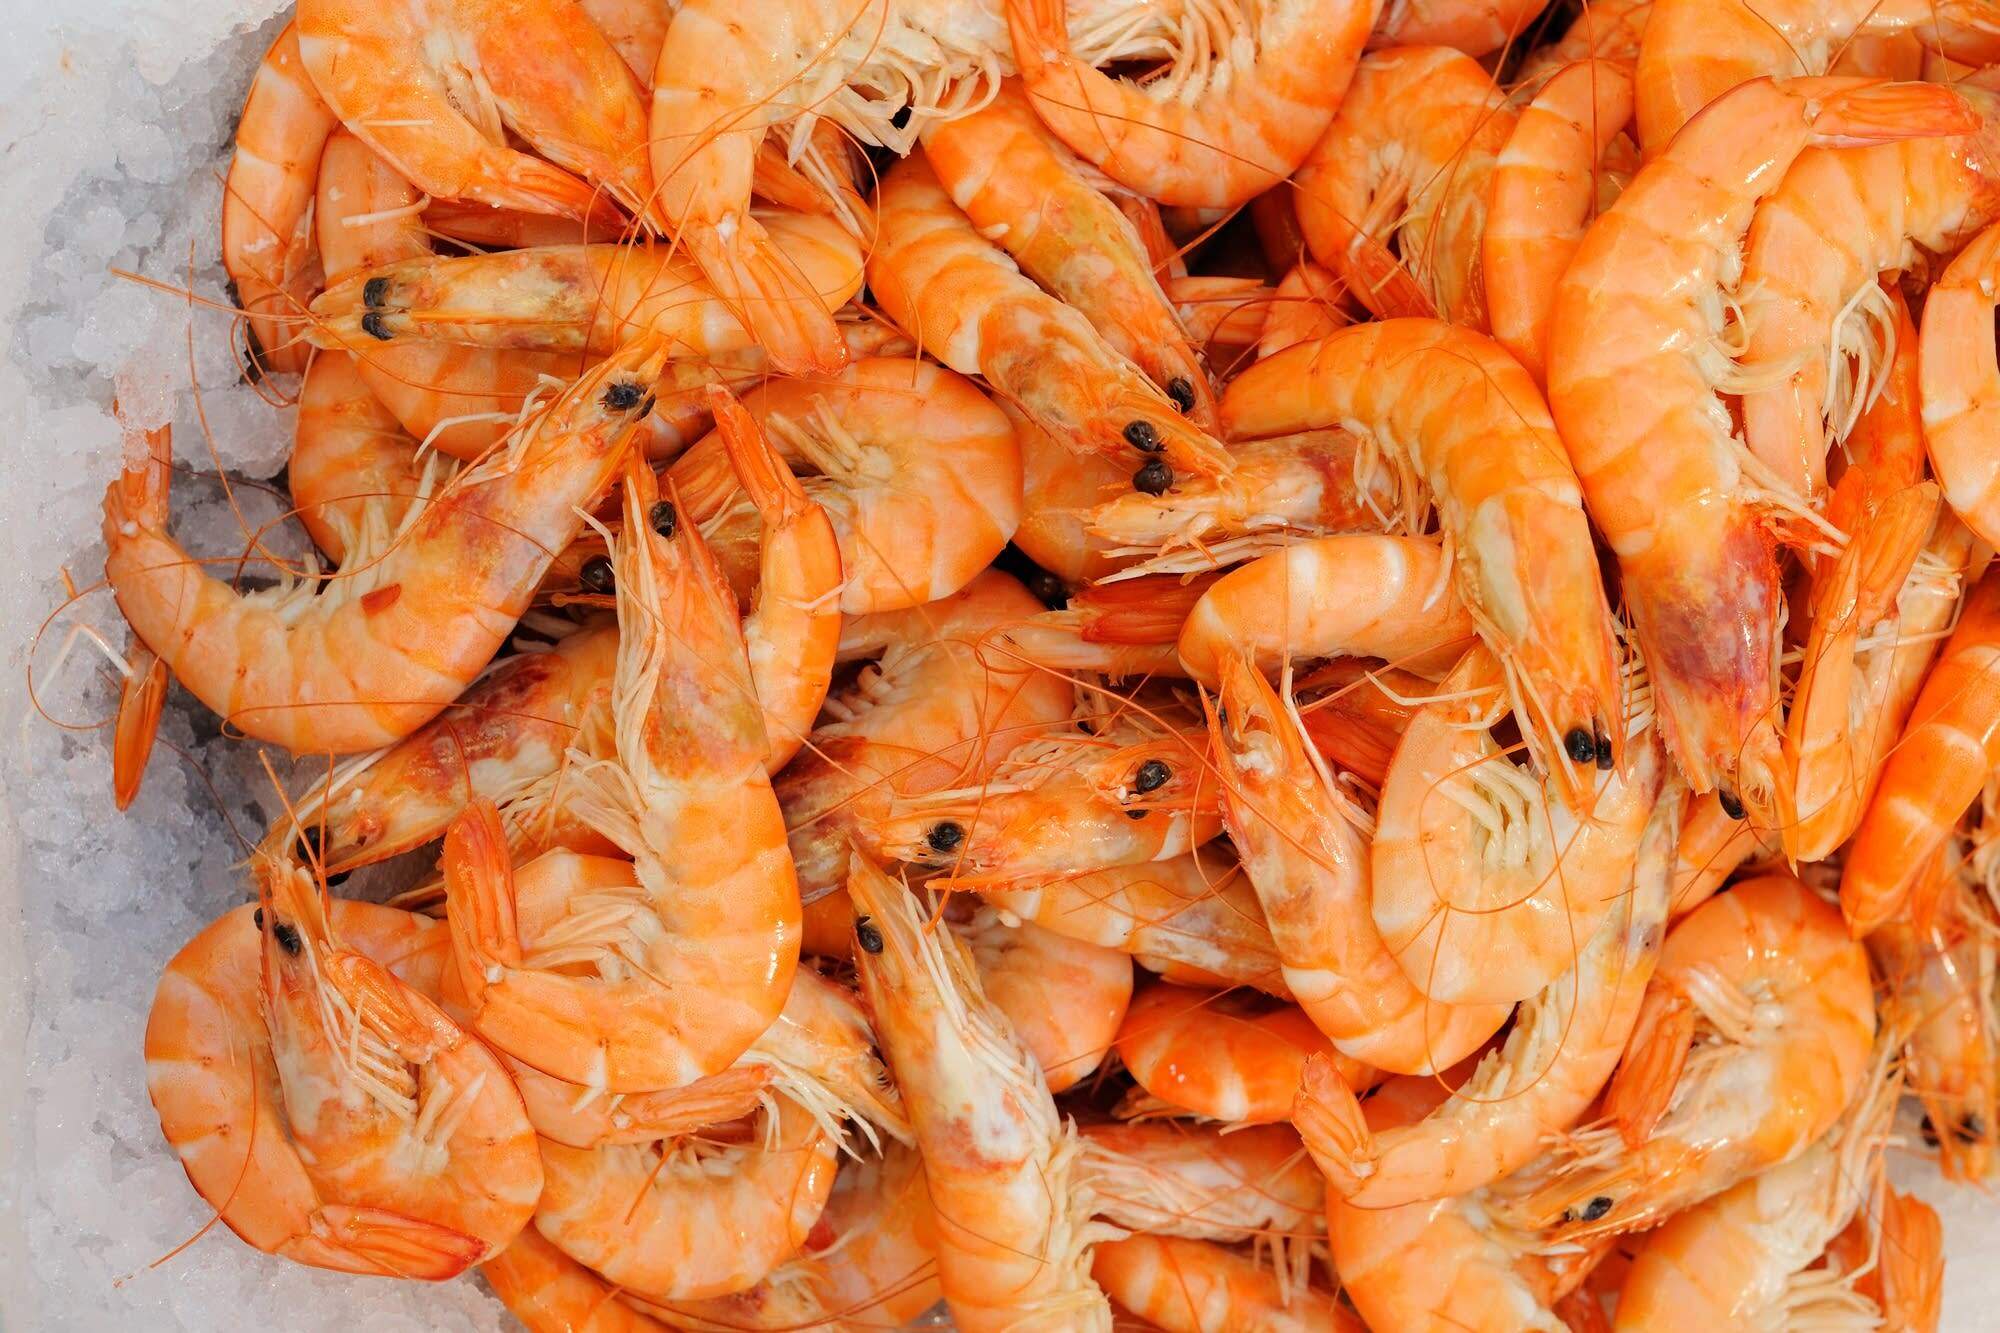 a-comprehensive-guide-to-buying-better-shrimp